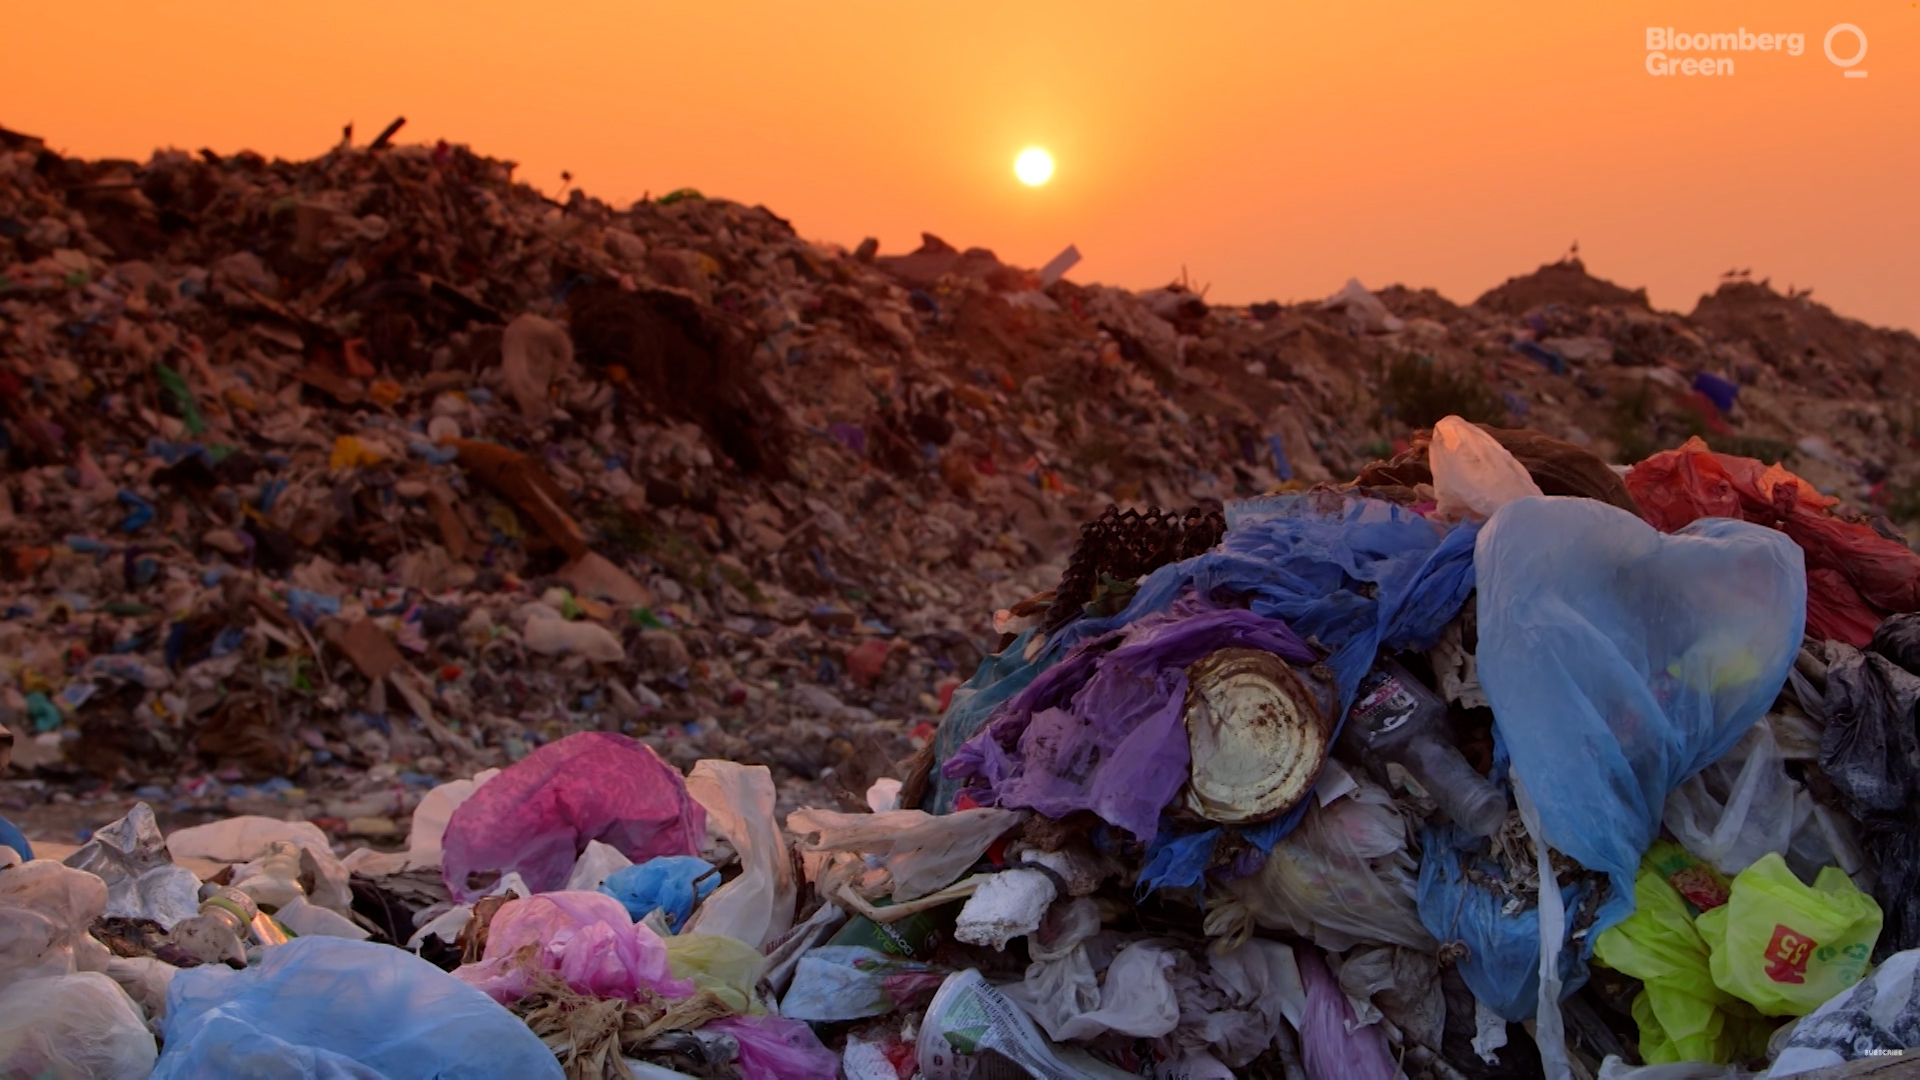 This image shows several landfills of trash, mostly containing plastic.